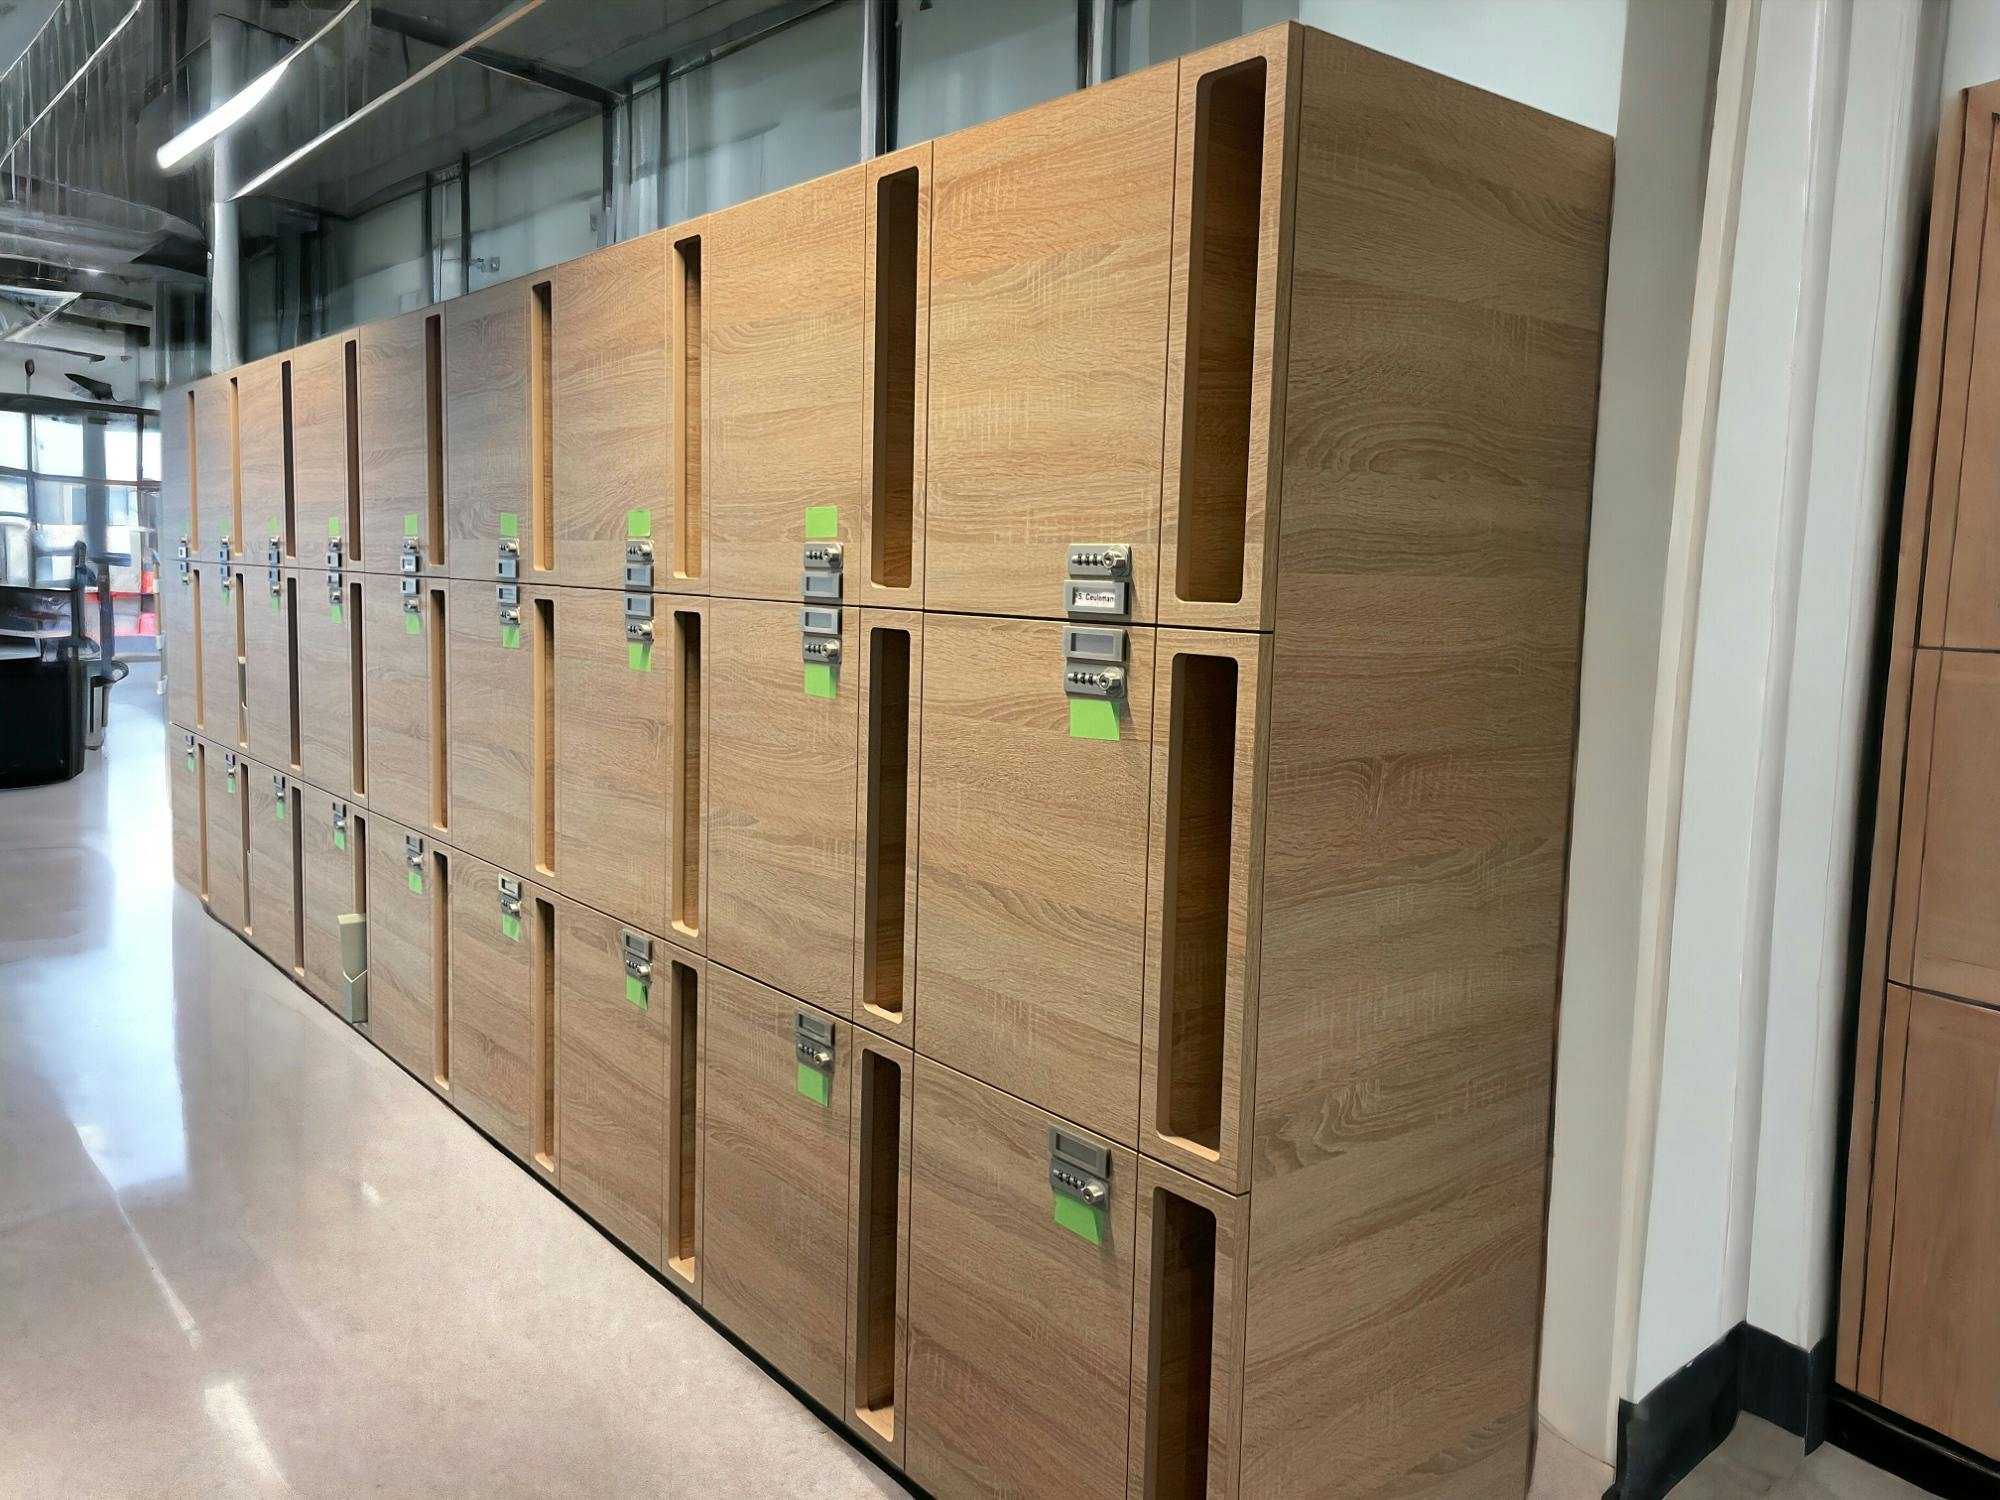 3x wood lockers - Second hand quality "Storage" - Relieve Furniture